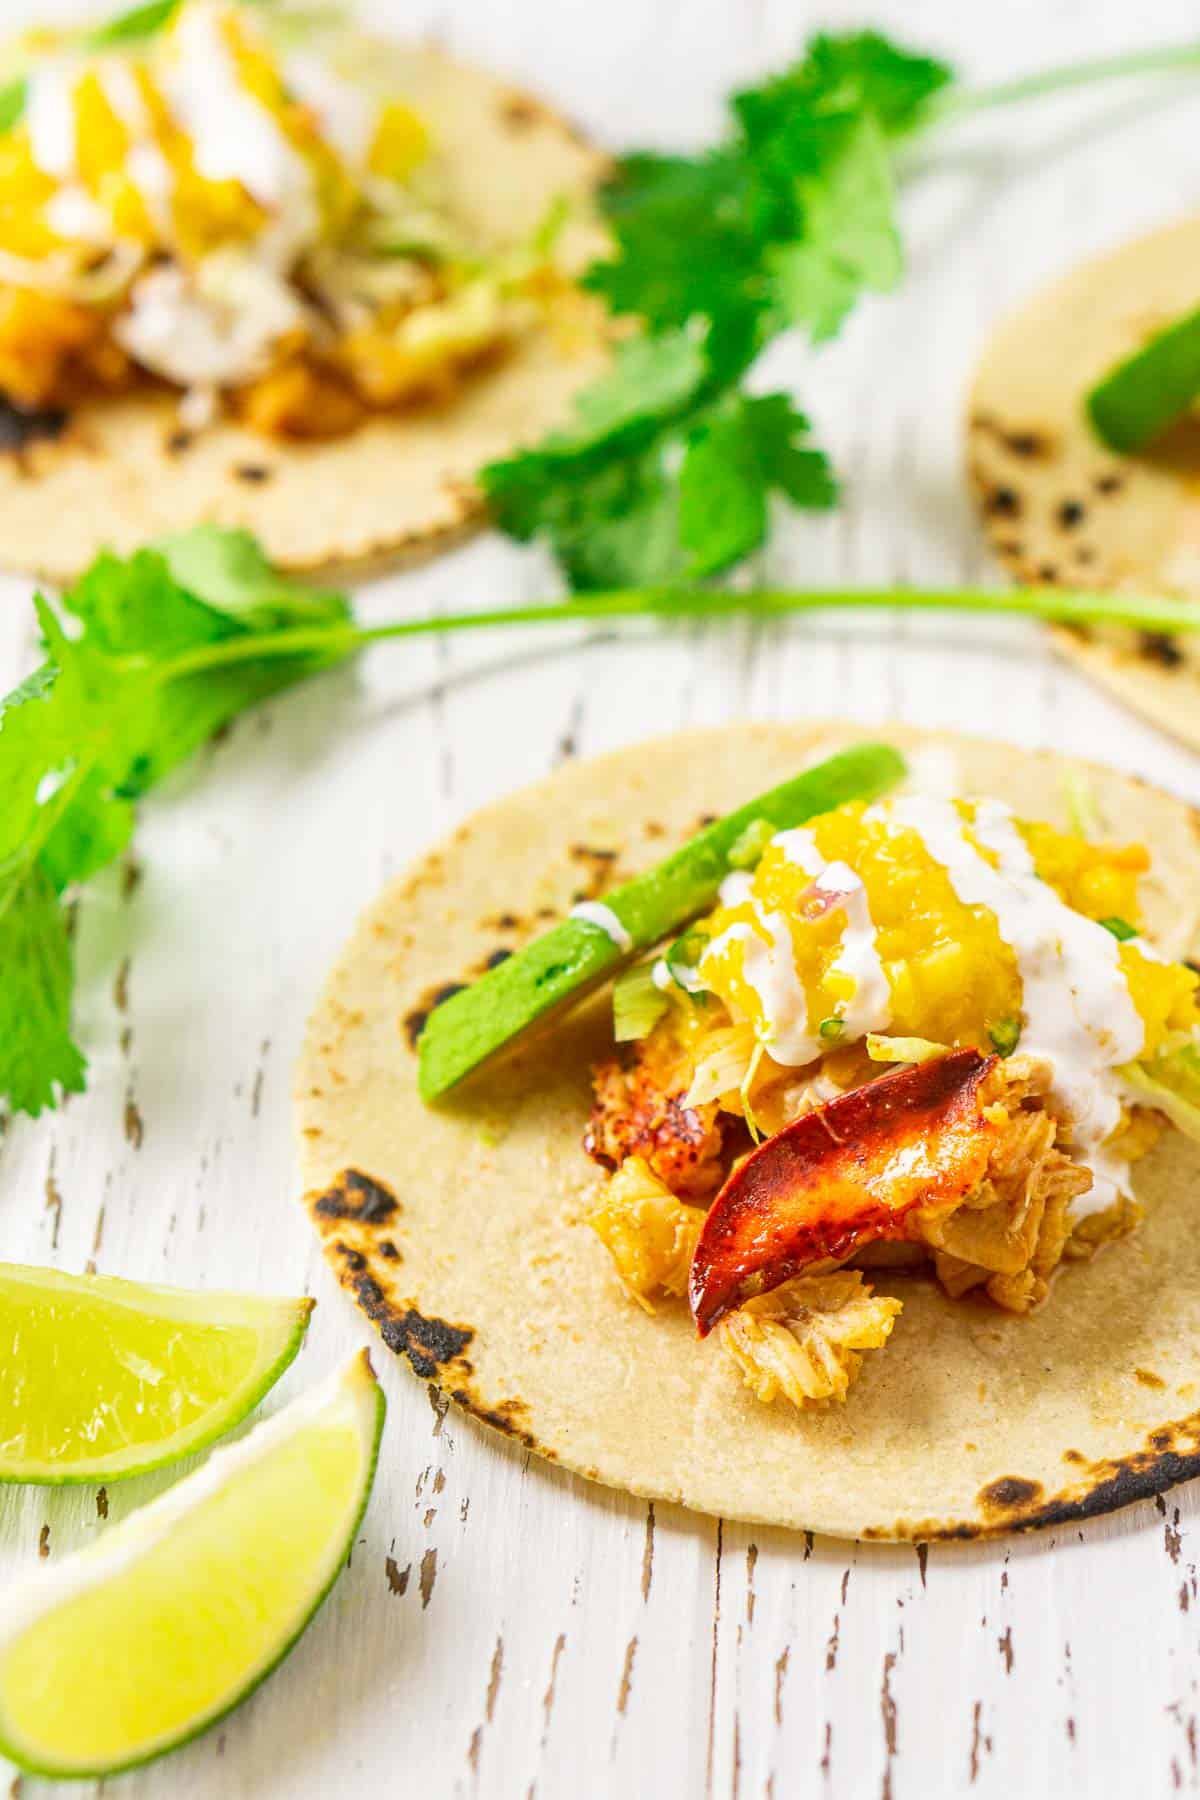 The lobster tacos on a white wooden board with limes and cilantro around it.